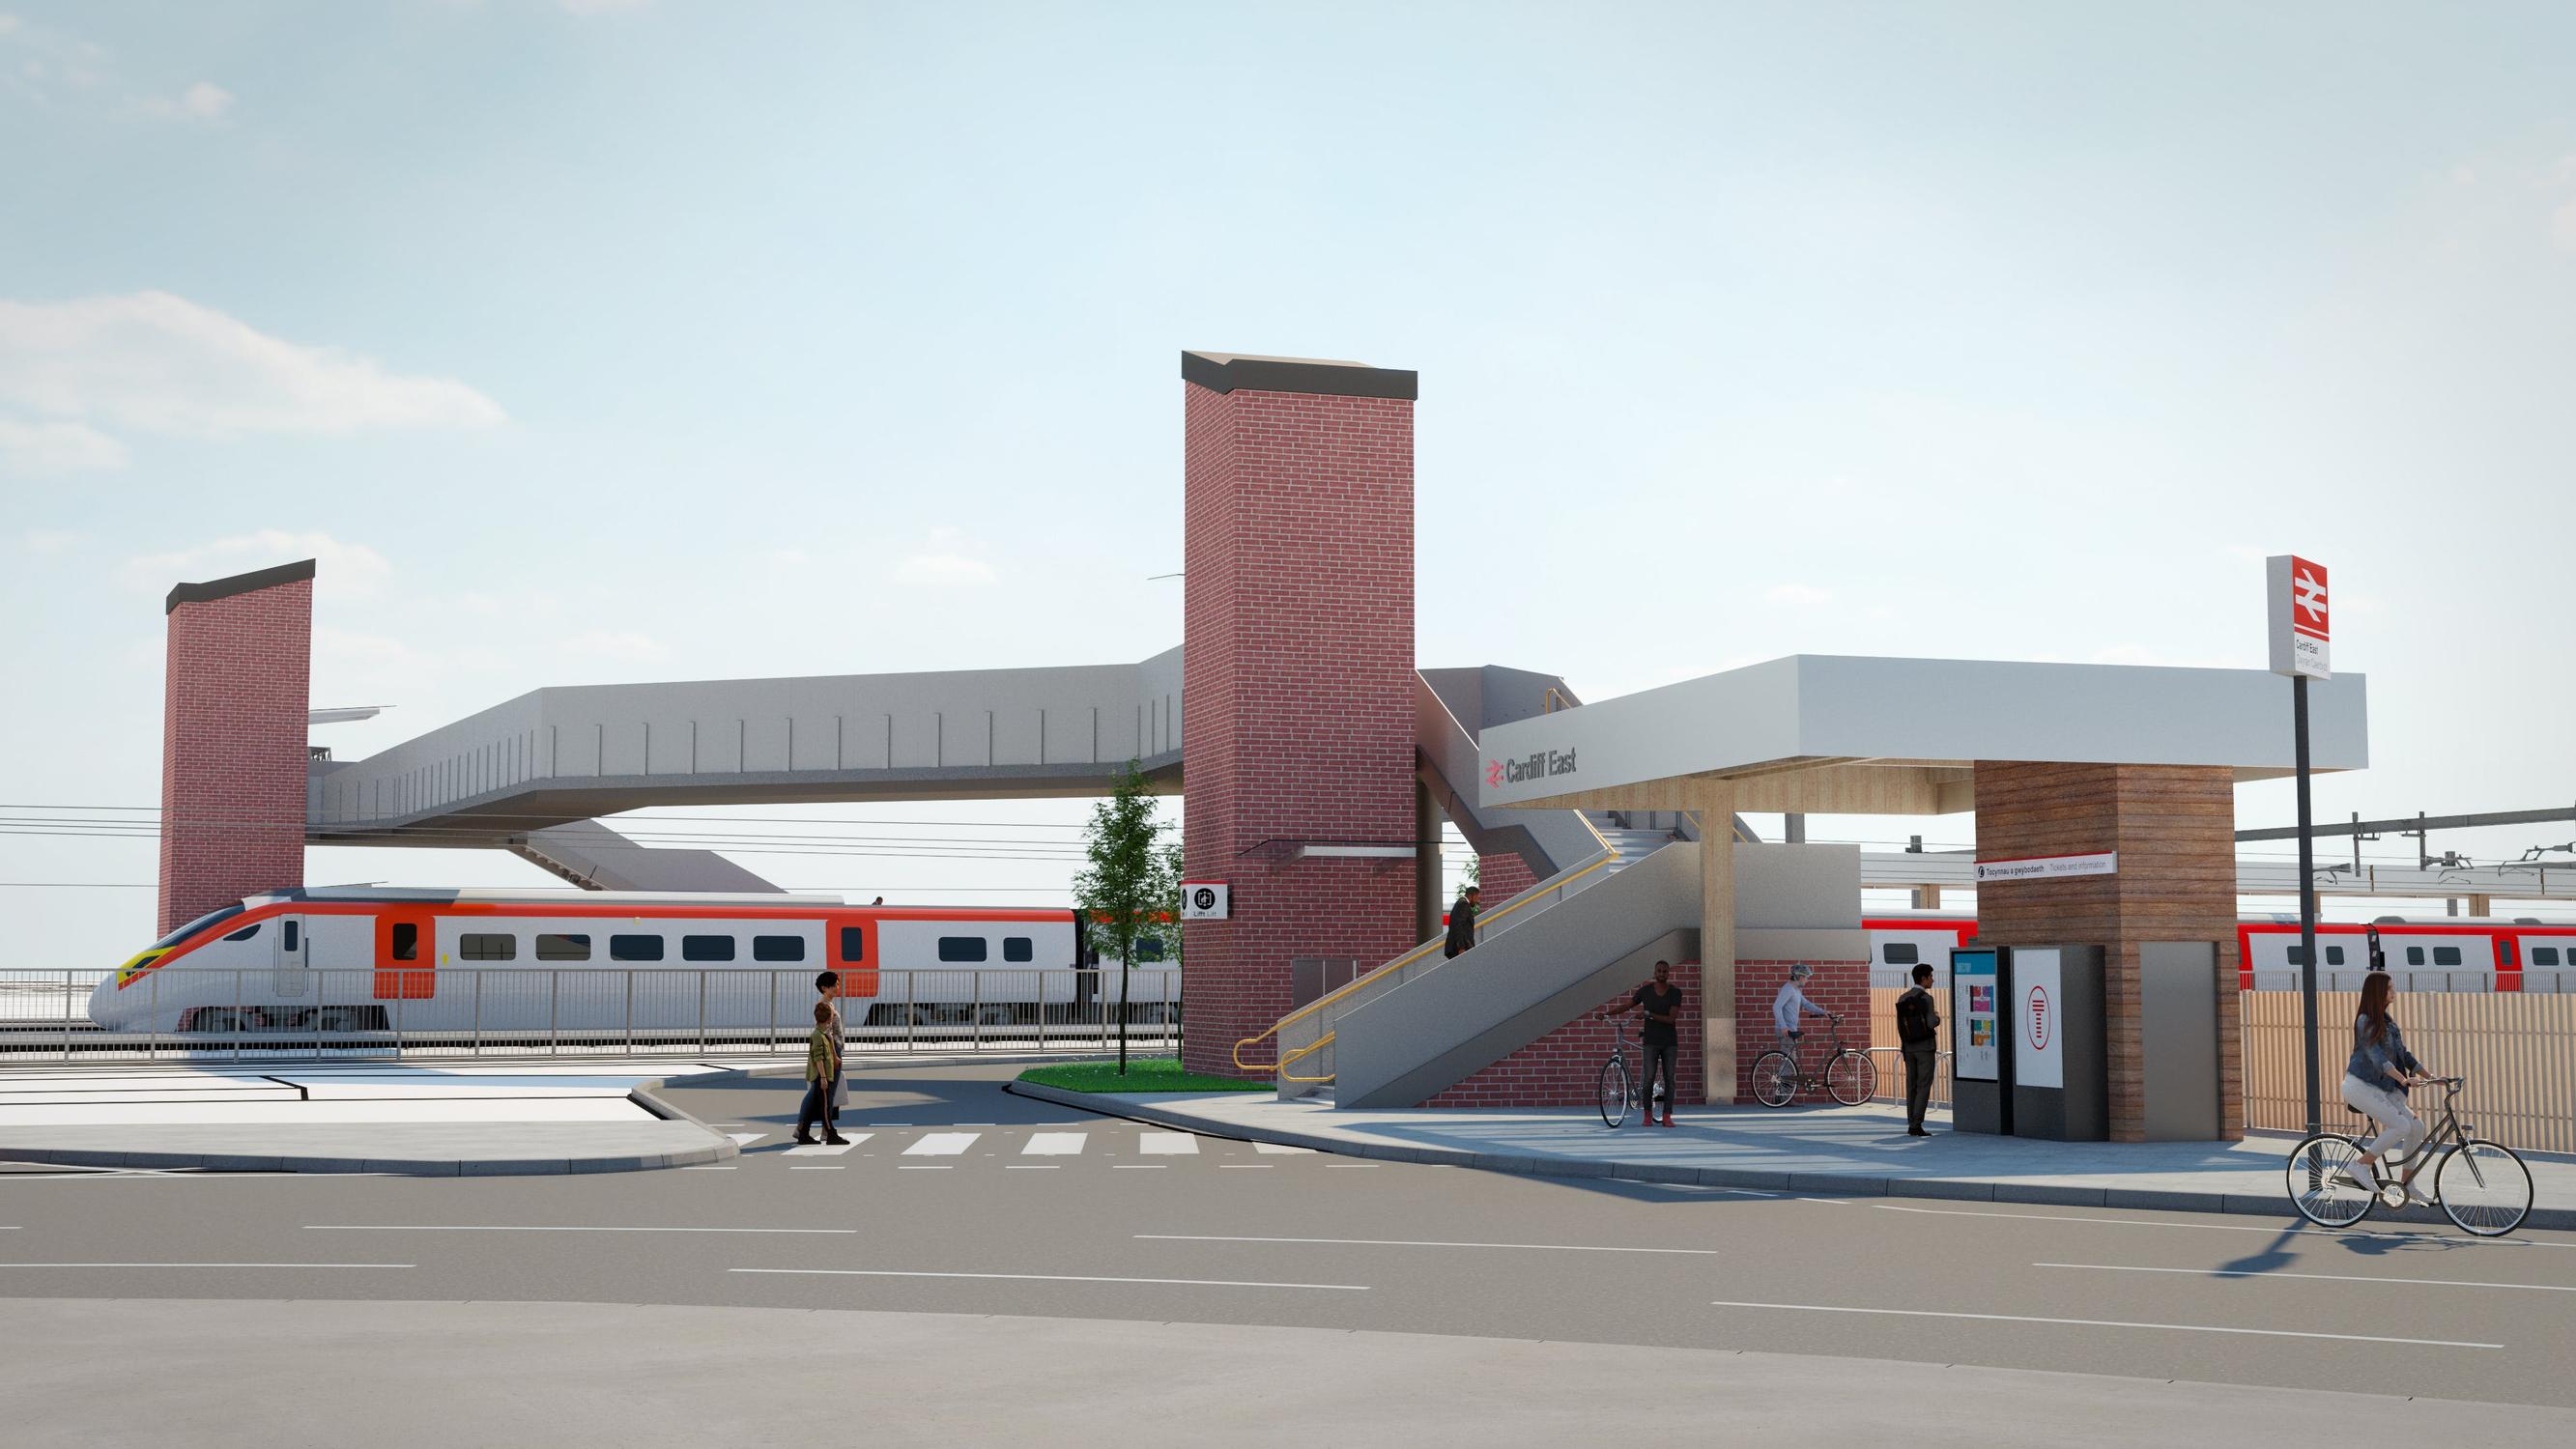 The new Cardiff East Street station design proposal